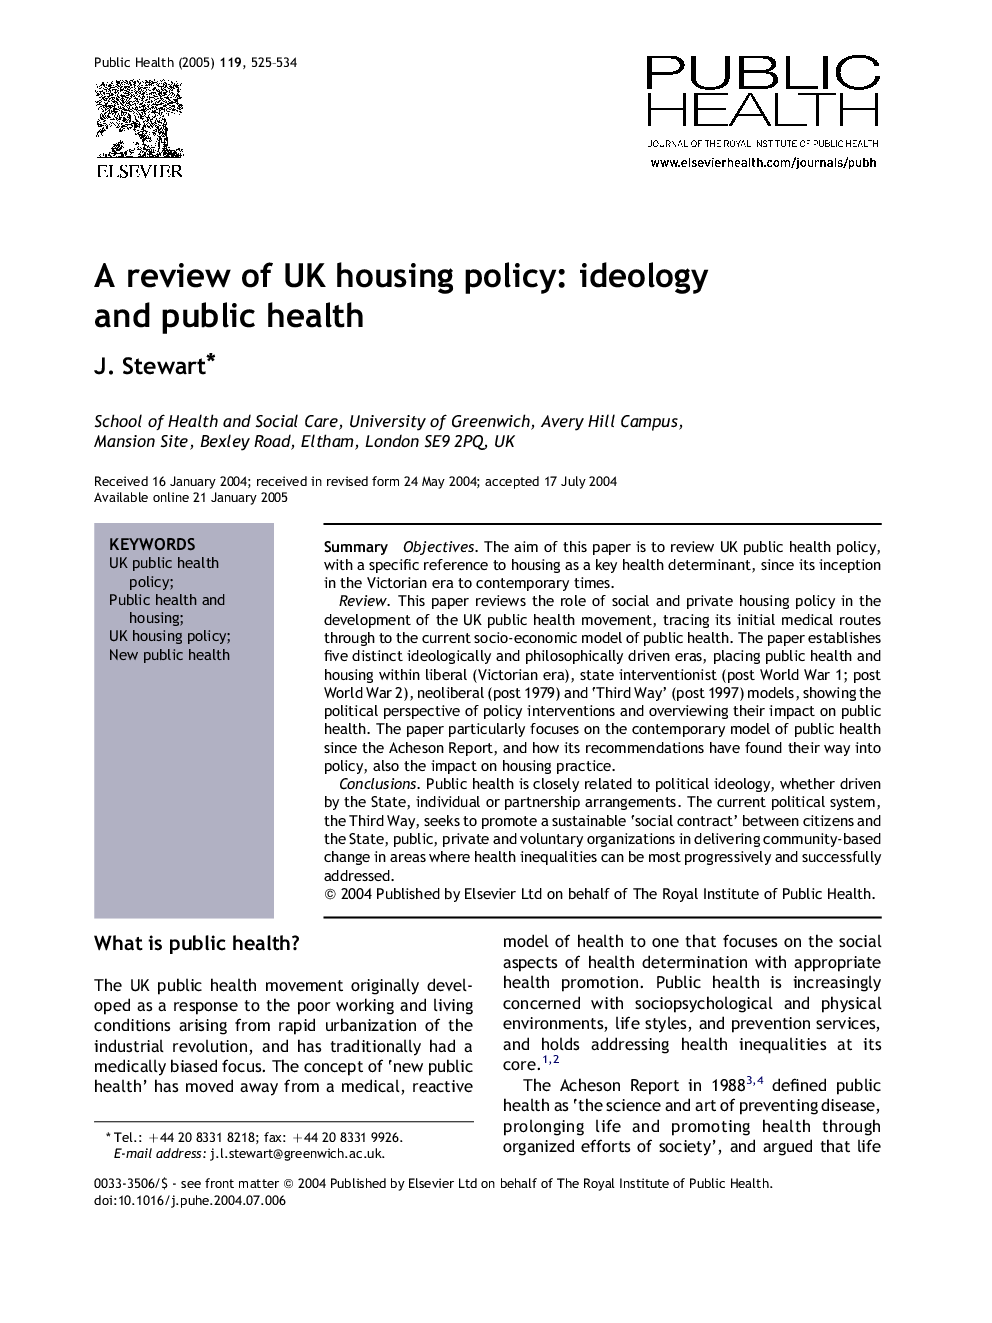 A review of UK housing policy: ideology and public health